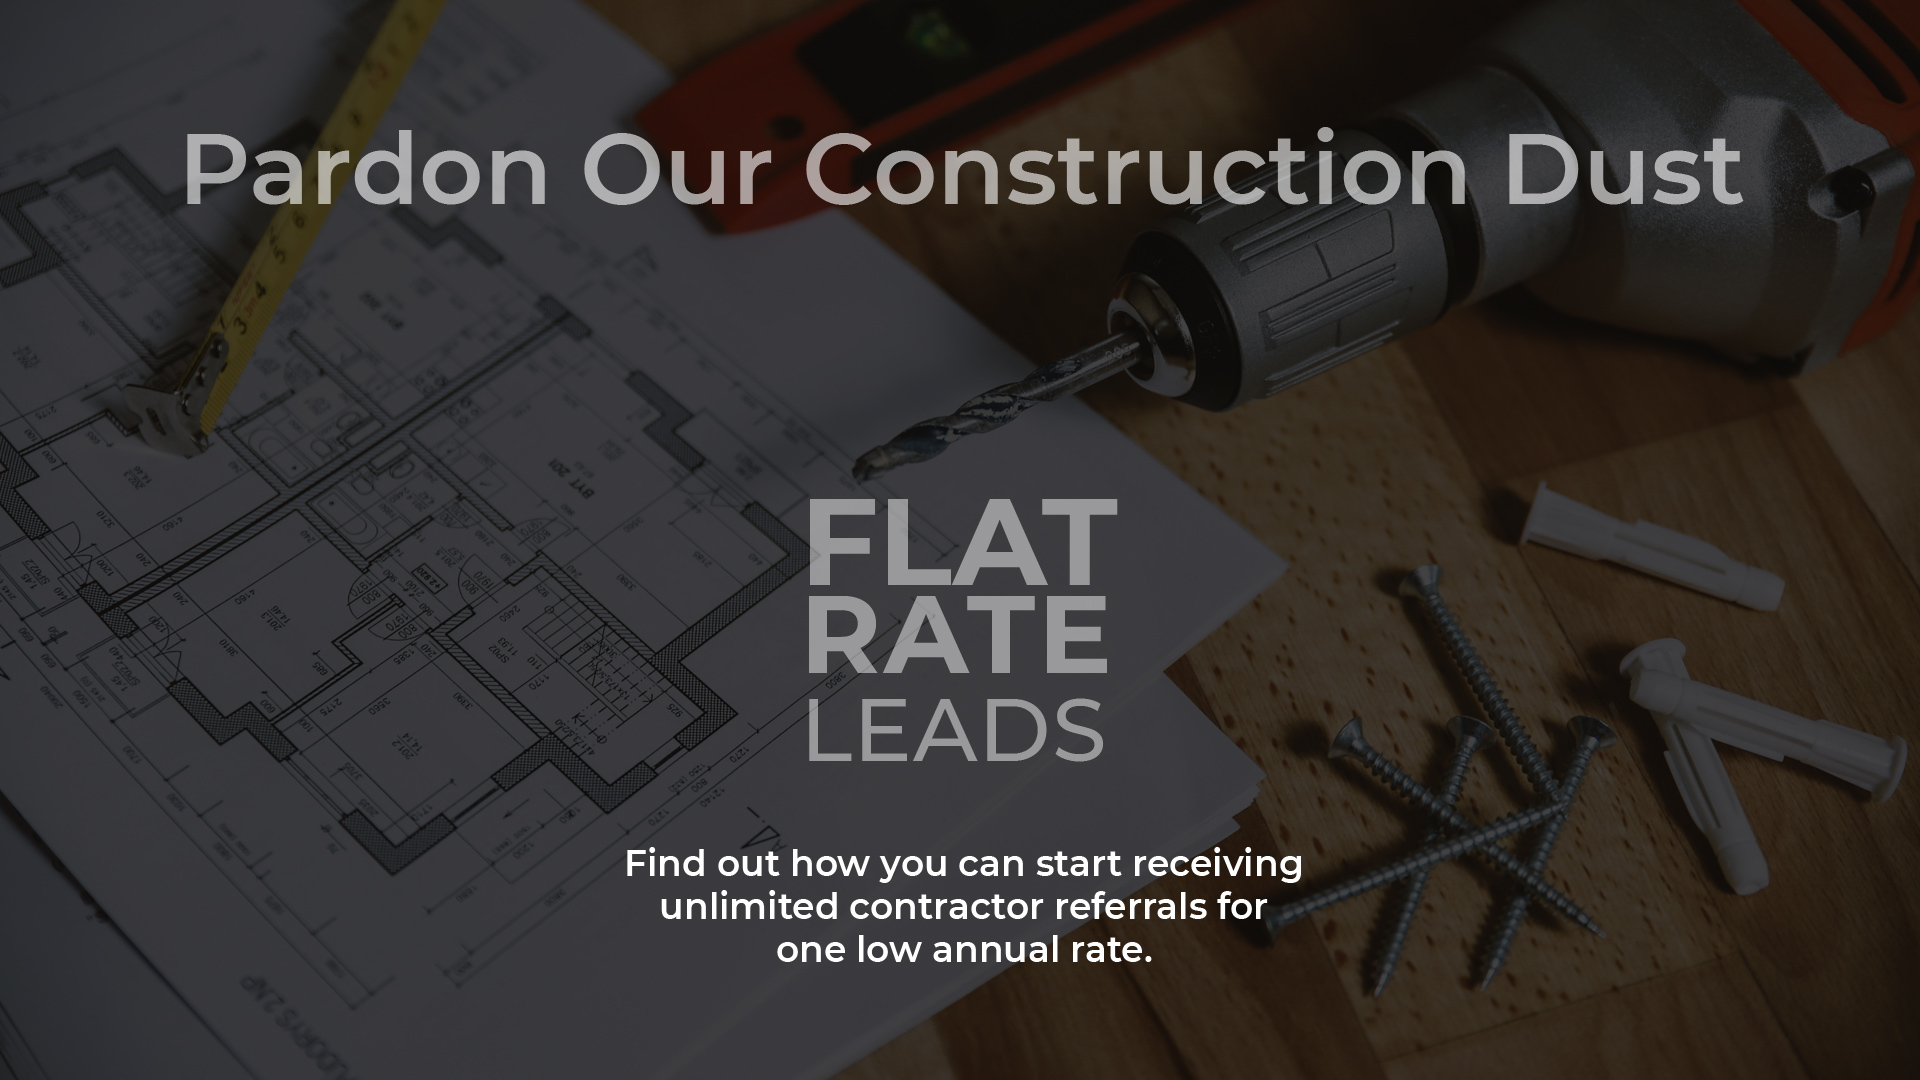 flat rate leads website under construction with blueprint screwdriver and sheetrock screws